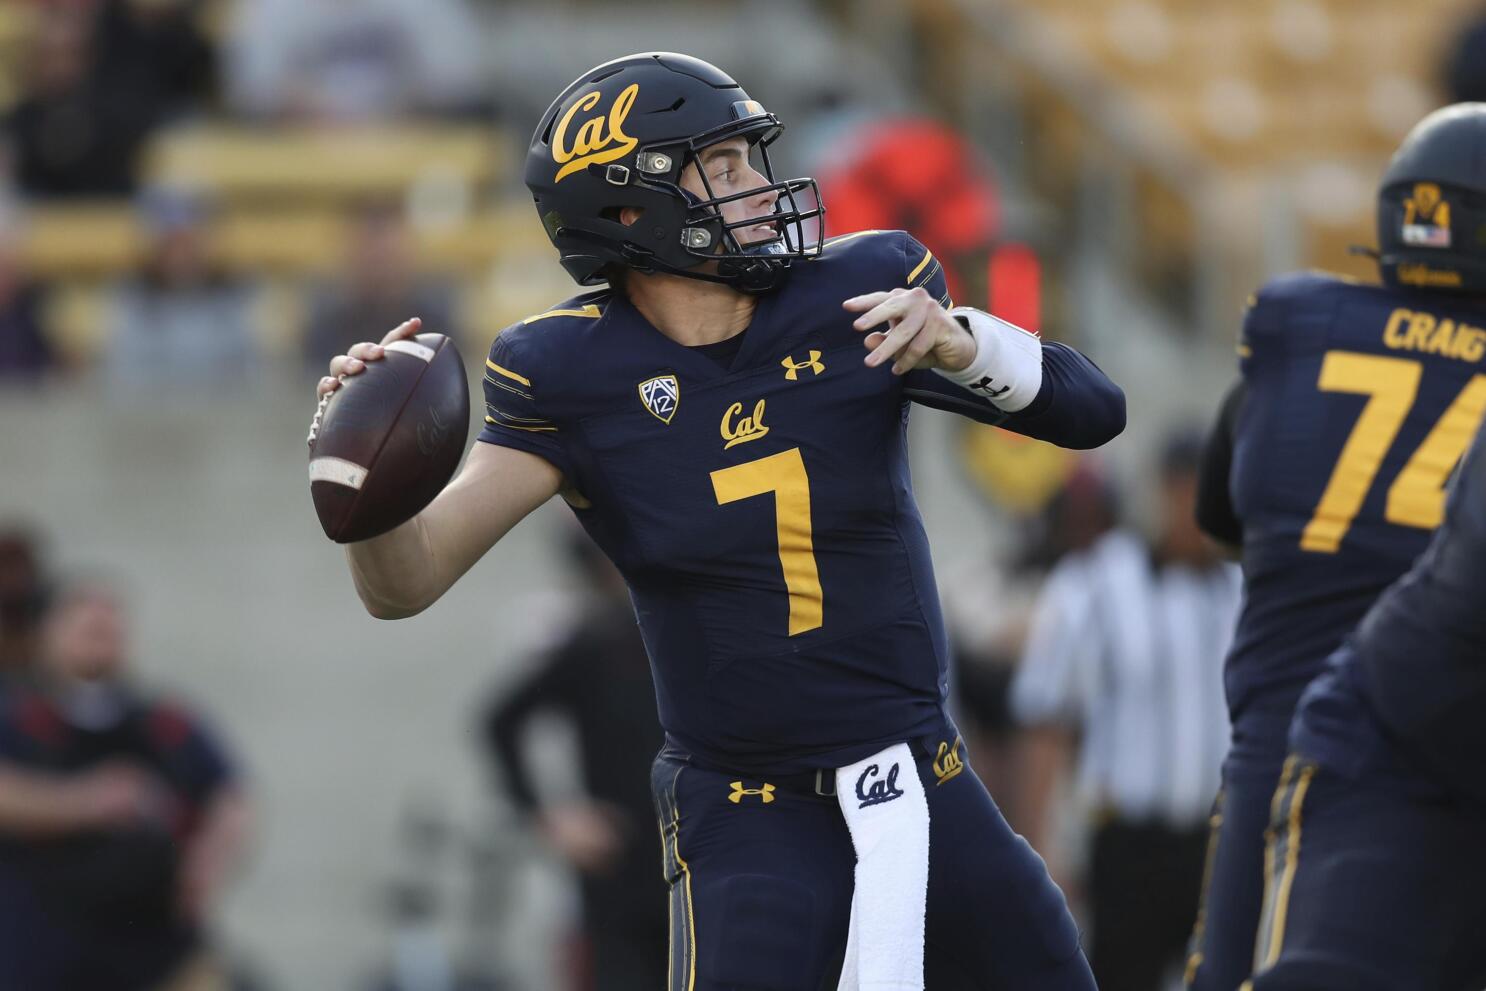 Cal Football: Wide Receiver Trevon Clark To Enter the 2022 NFL